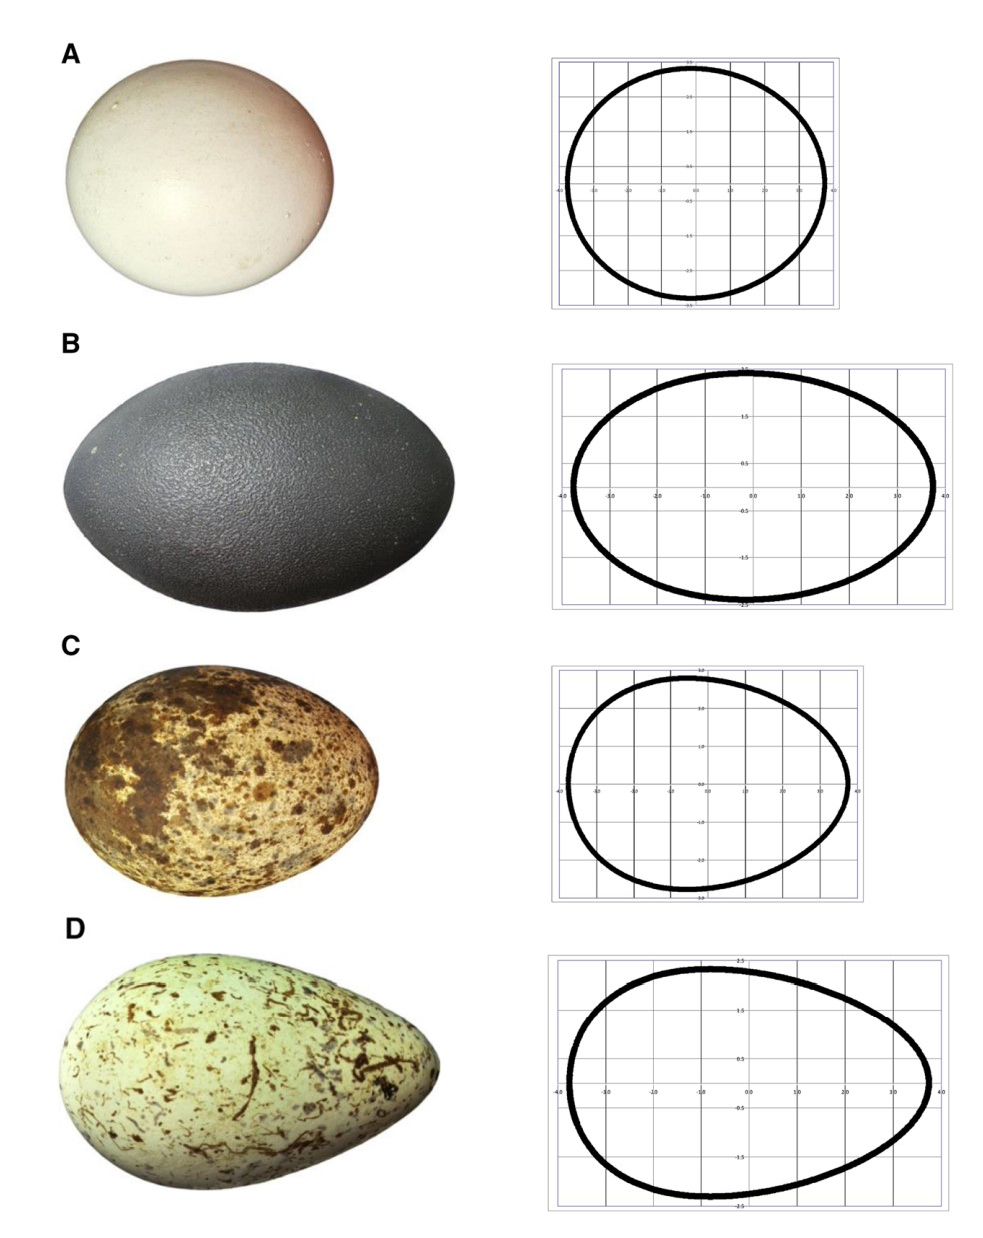 A figure depicting four eggs of different shapes: circle, ellipse, oval, and pyriform